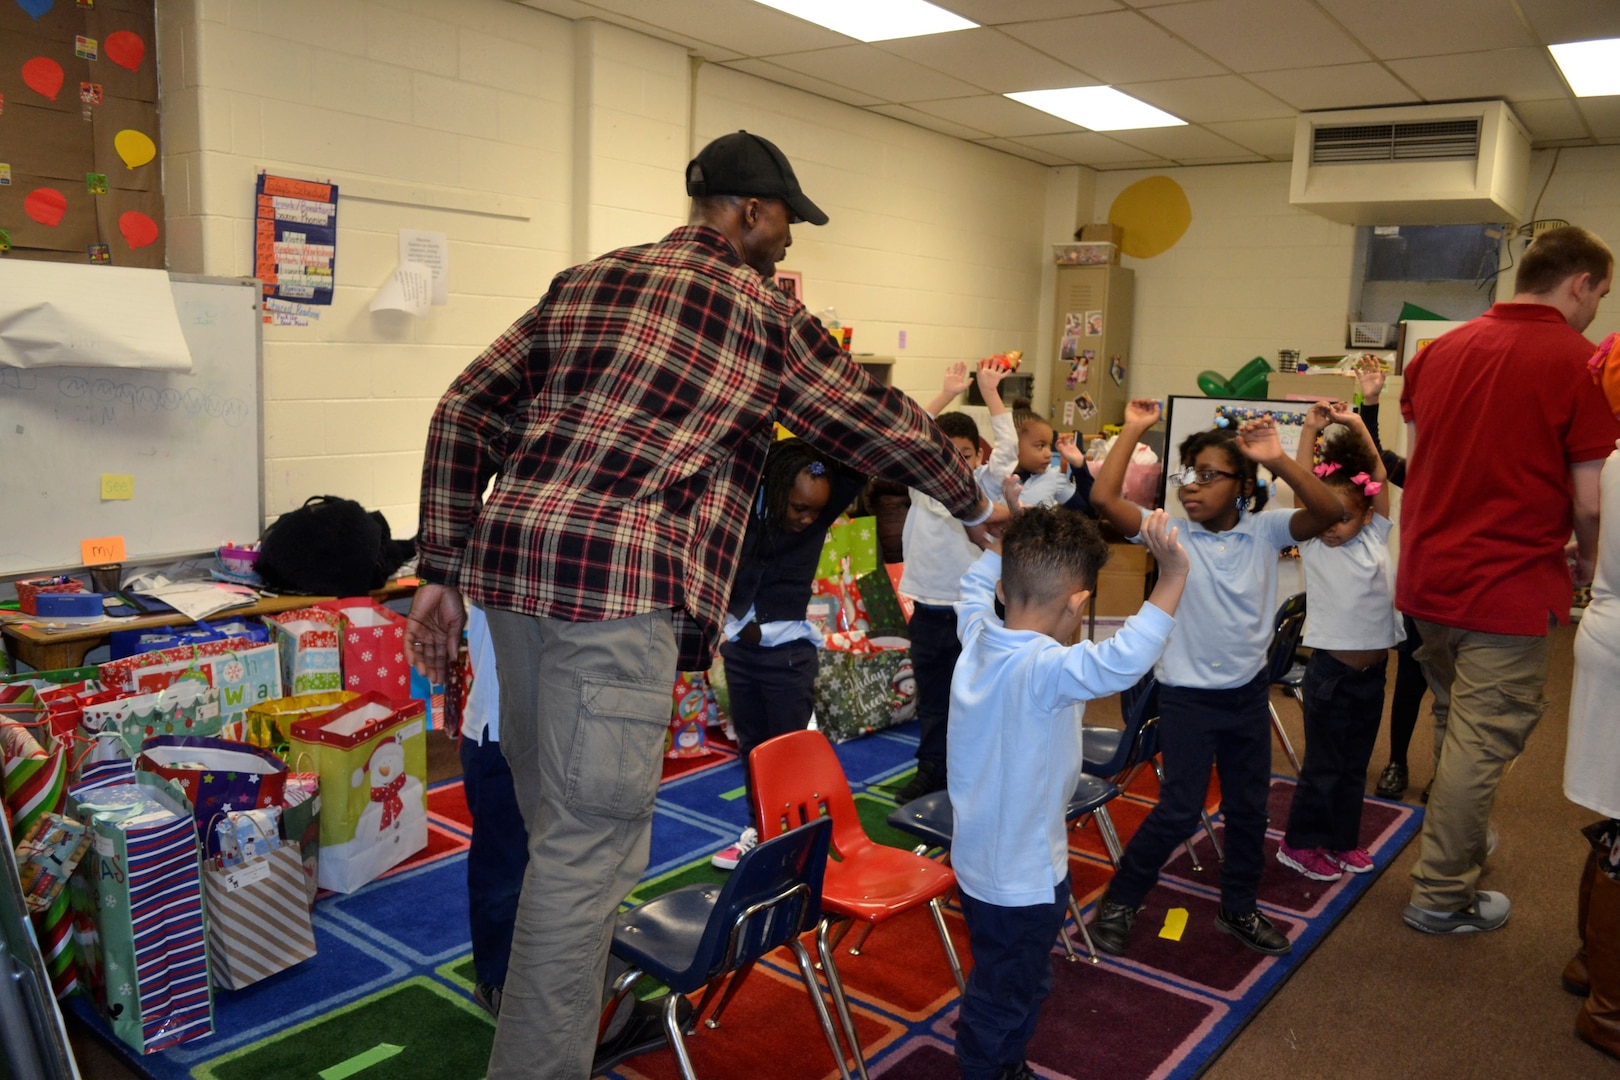 Shahid Wilds, a Medical supply chain employee, left middle, plays with students during the annual Children’s Holiday Party at Benjamin Franklin Elementary School Dec. 6, 2018 in Philadelphia.